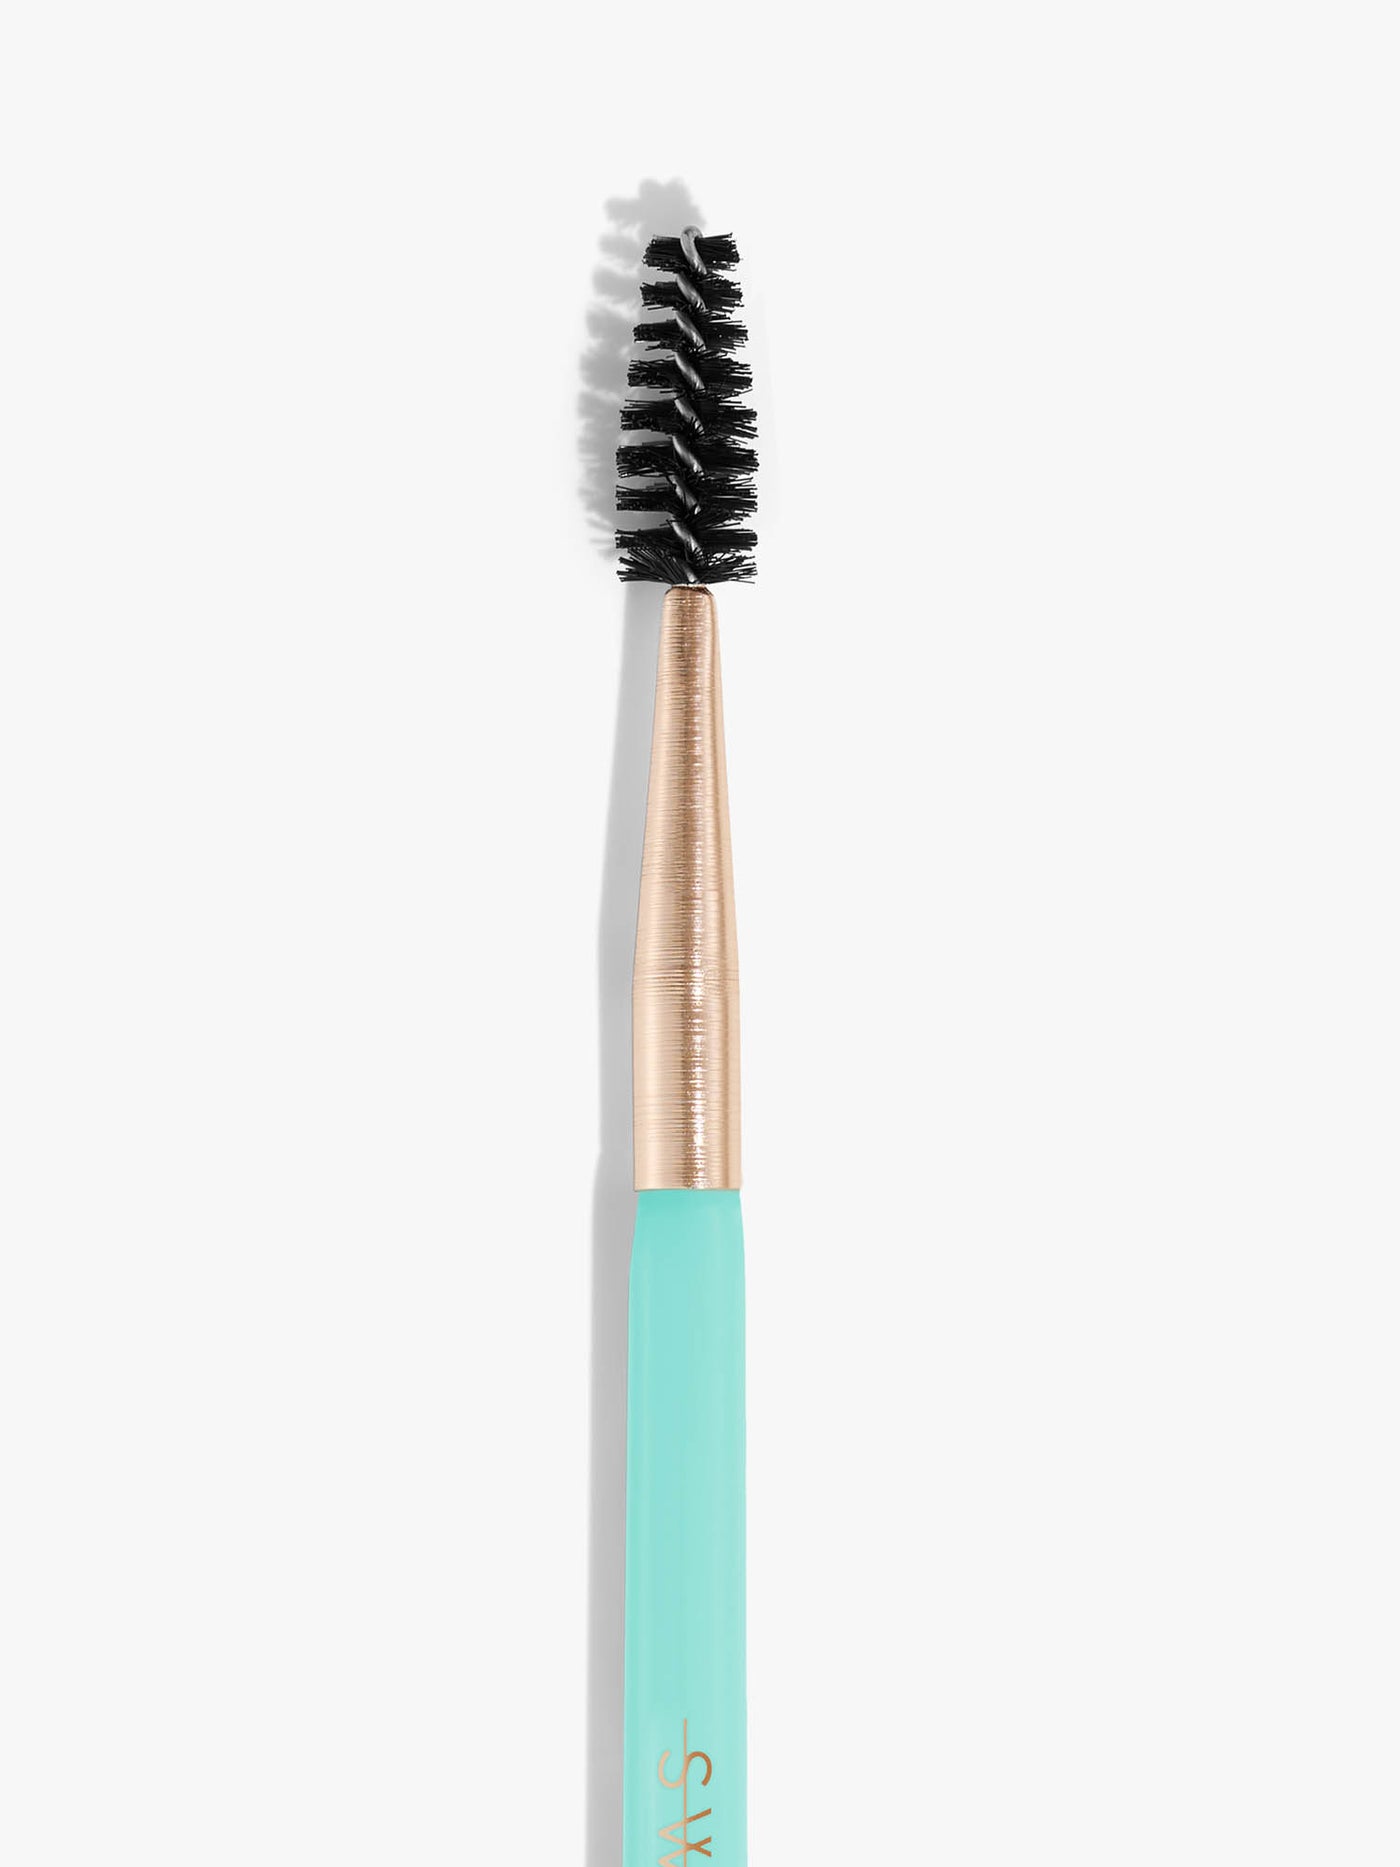 08 Duo Brow and Liner Brush